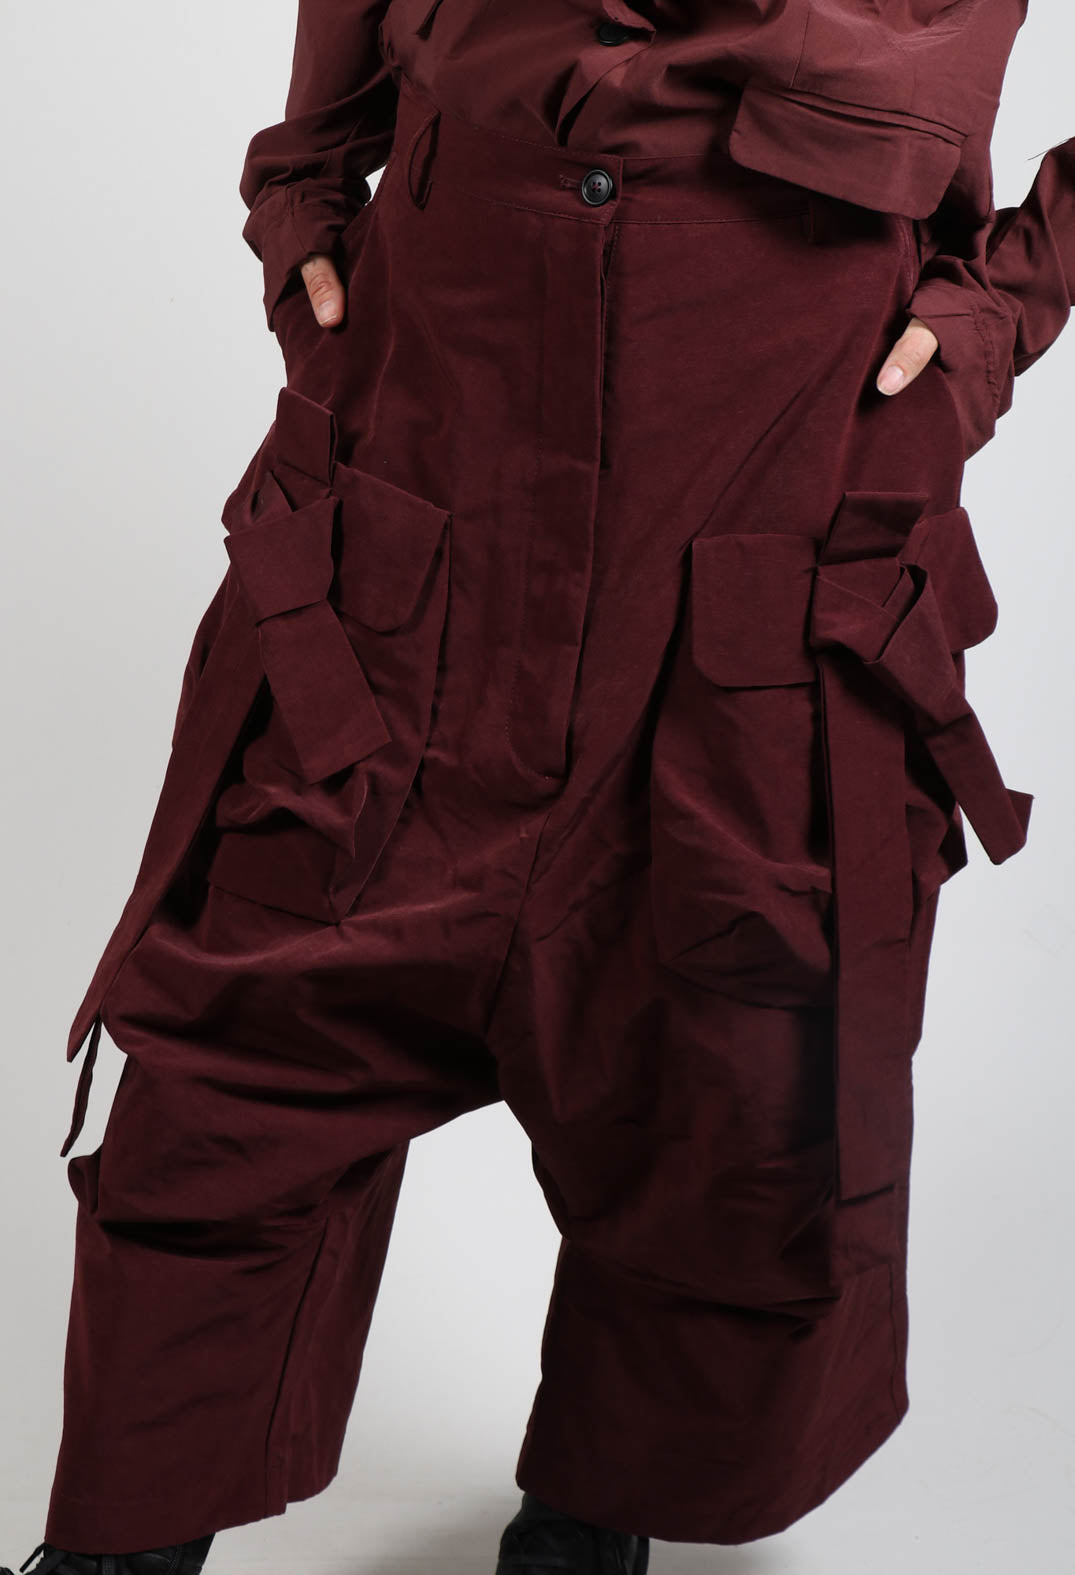 Drop Crotch Trousers with Belt Detail in Wood